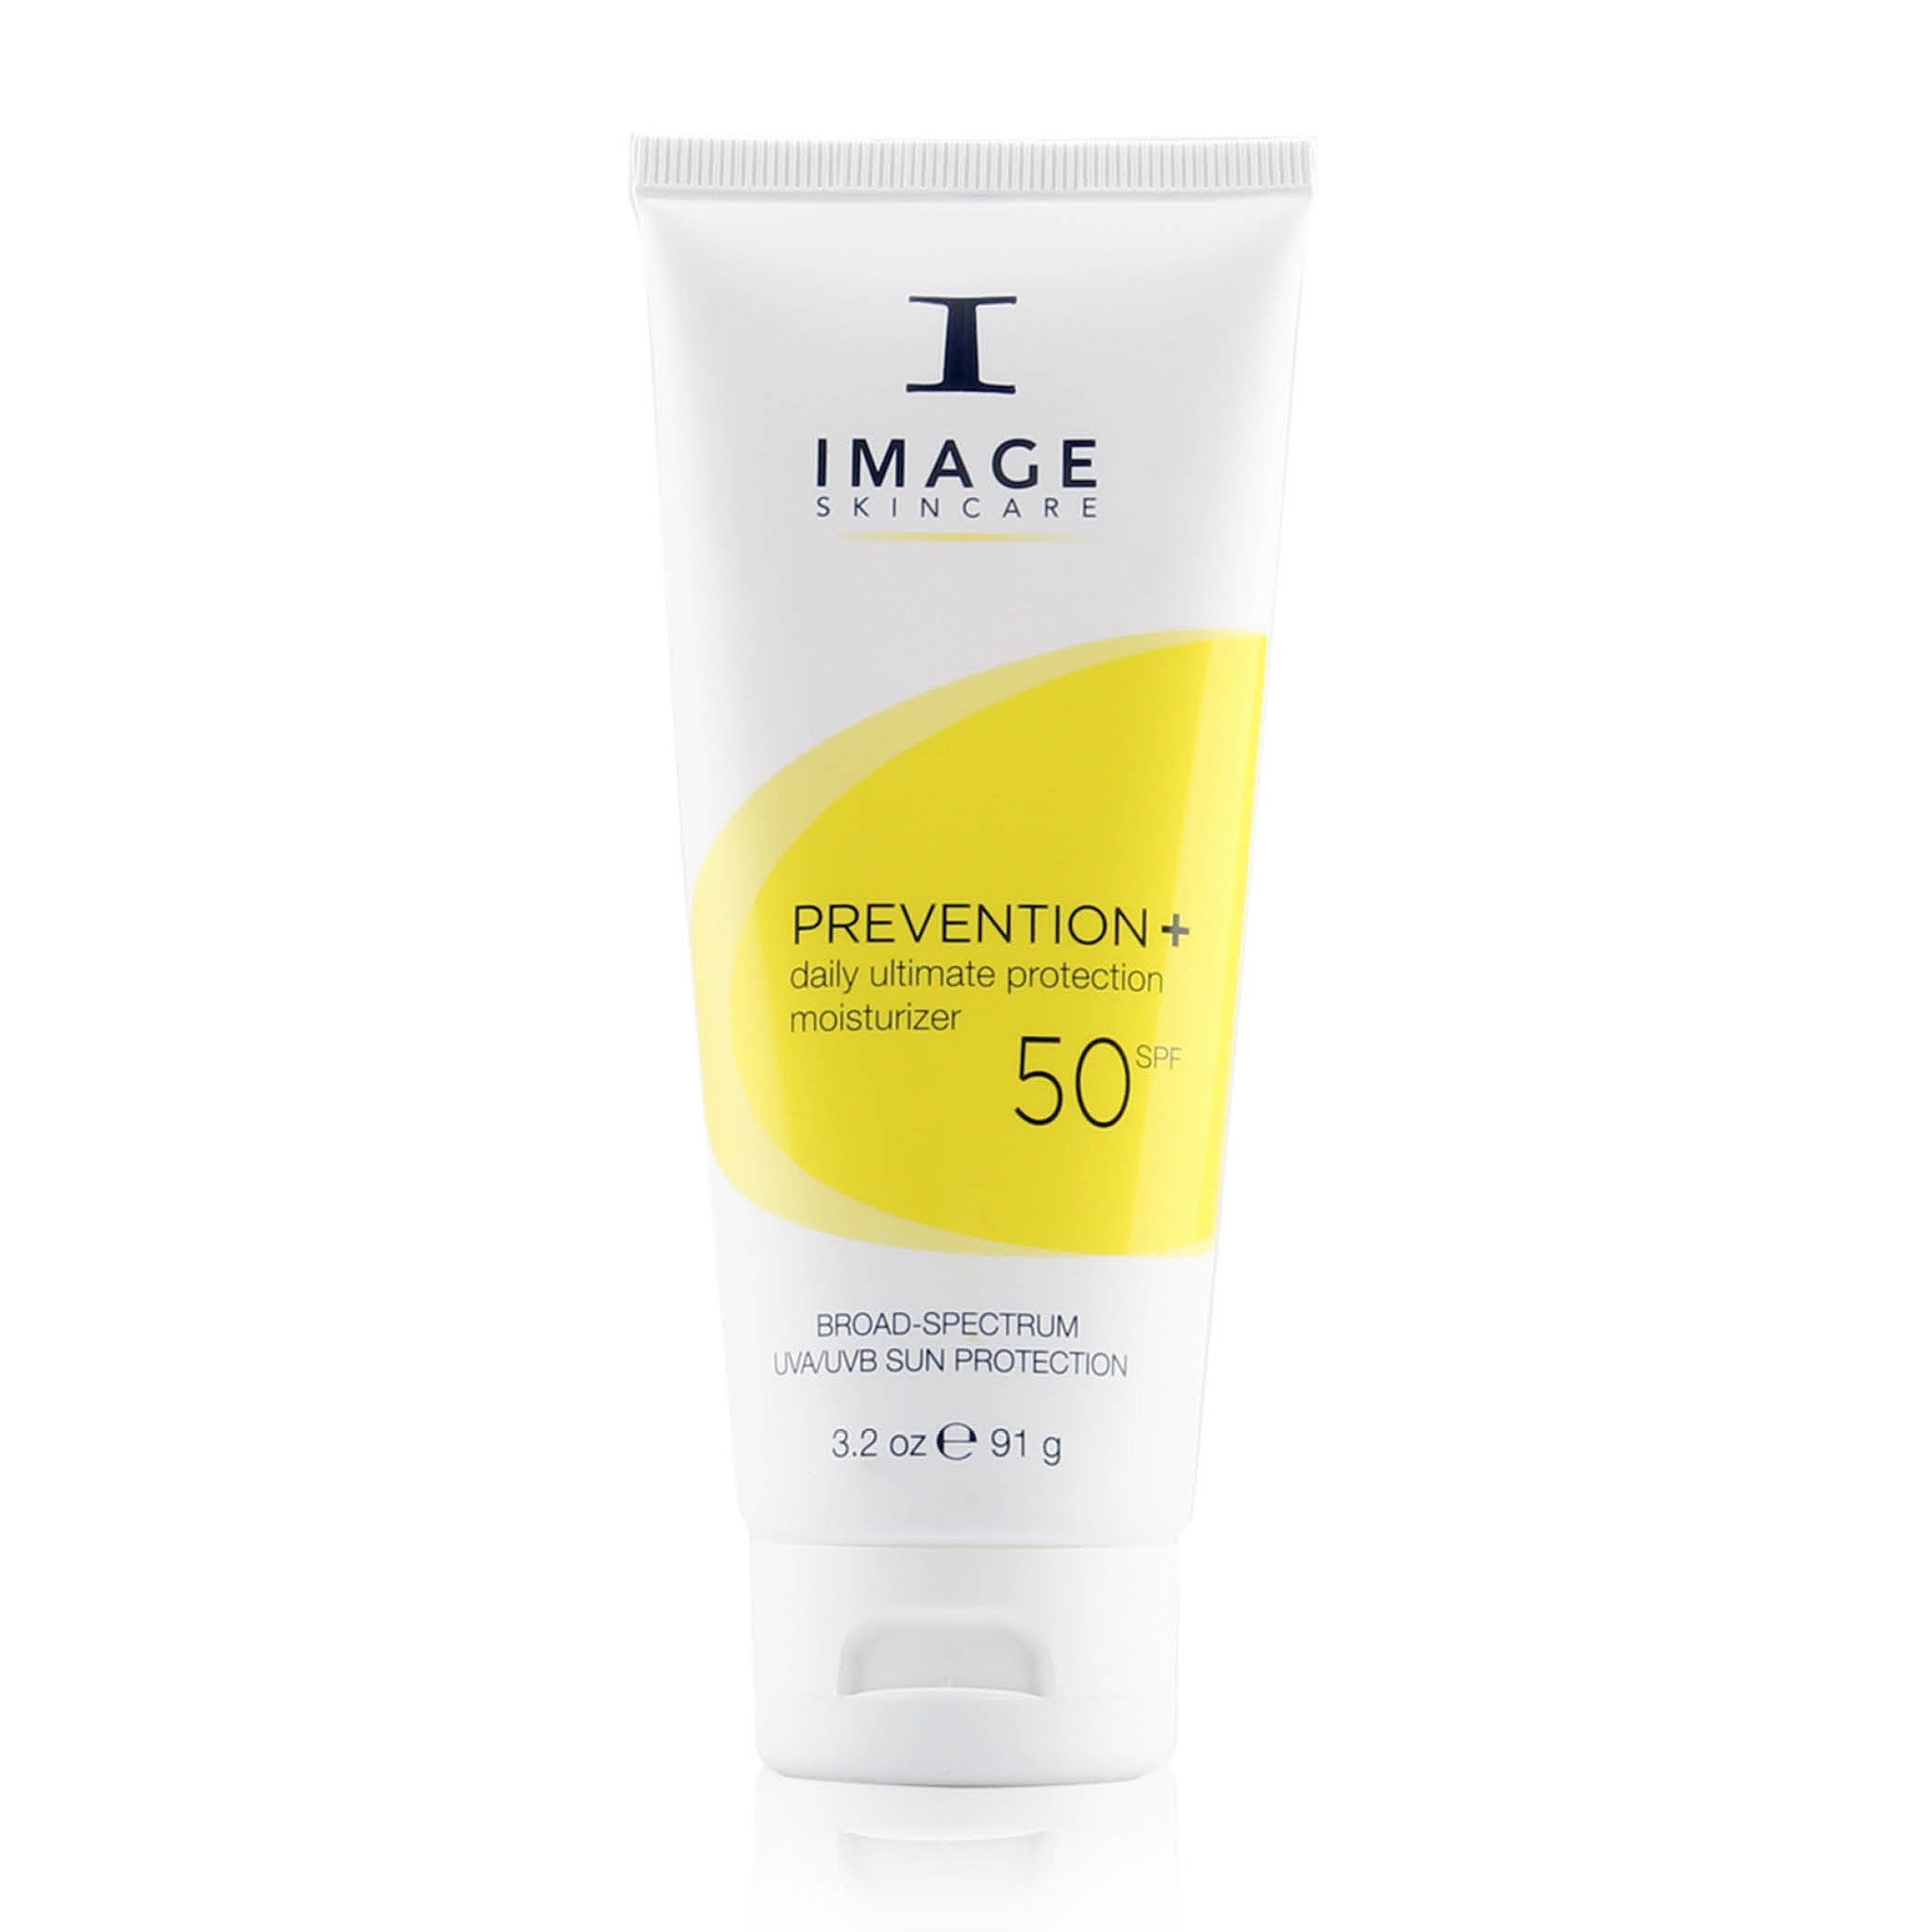 Prevention+ Daily Ultimate Protection SPF 50